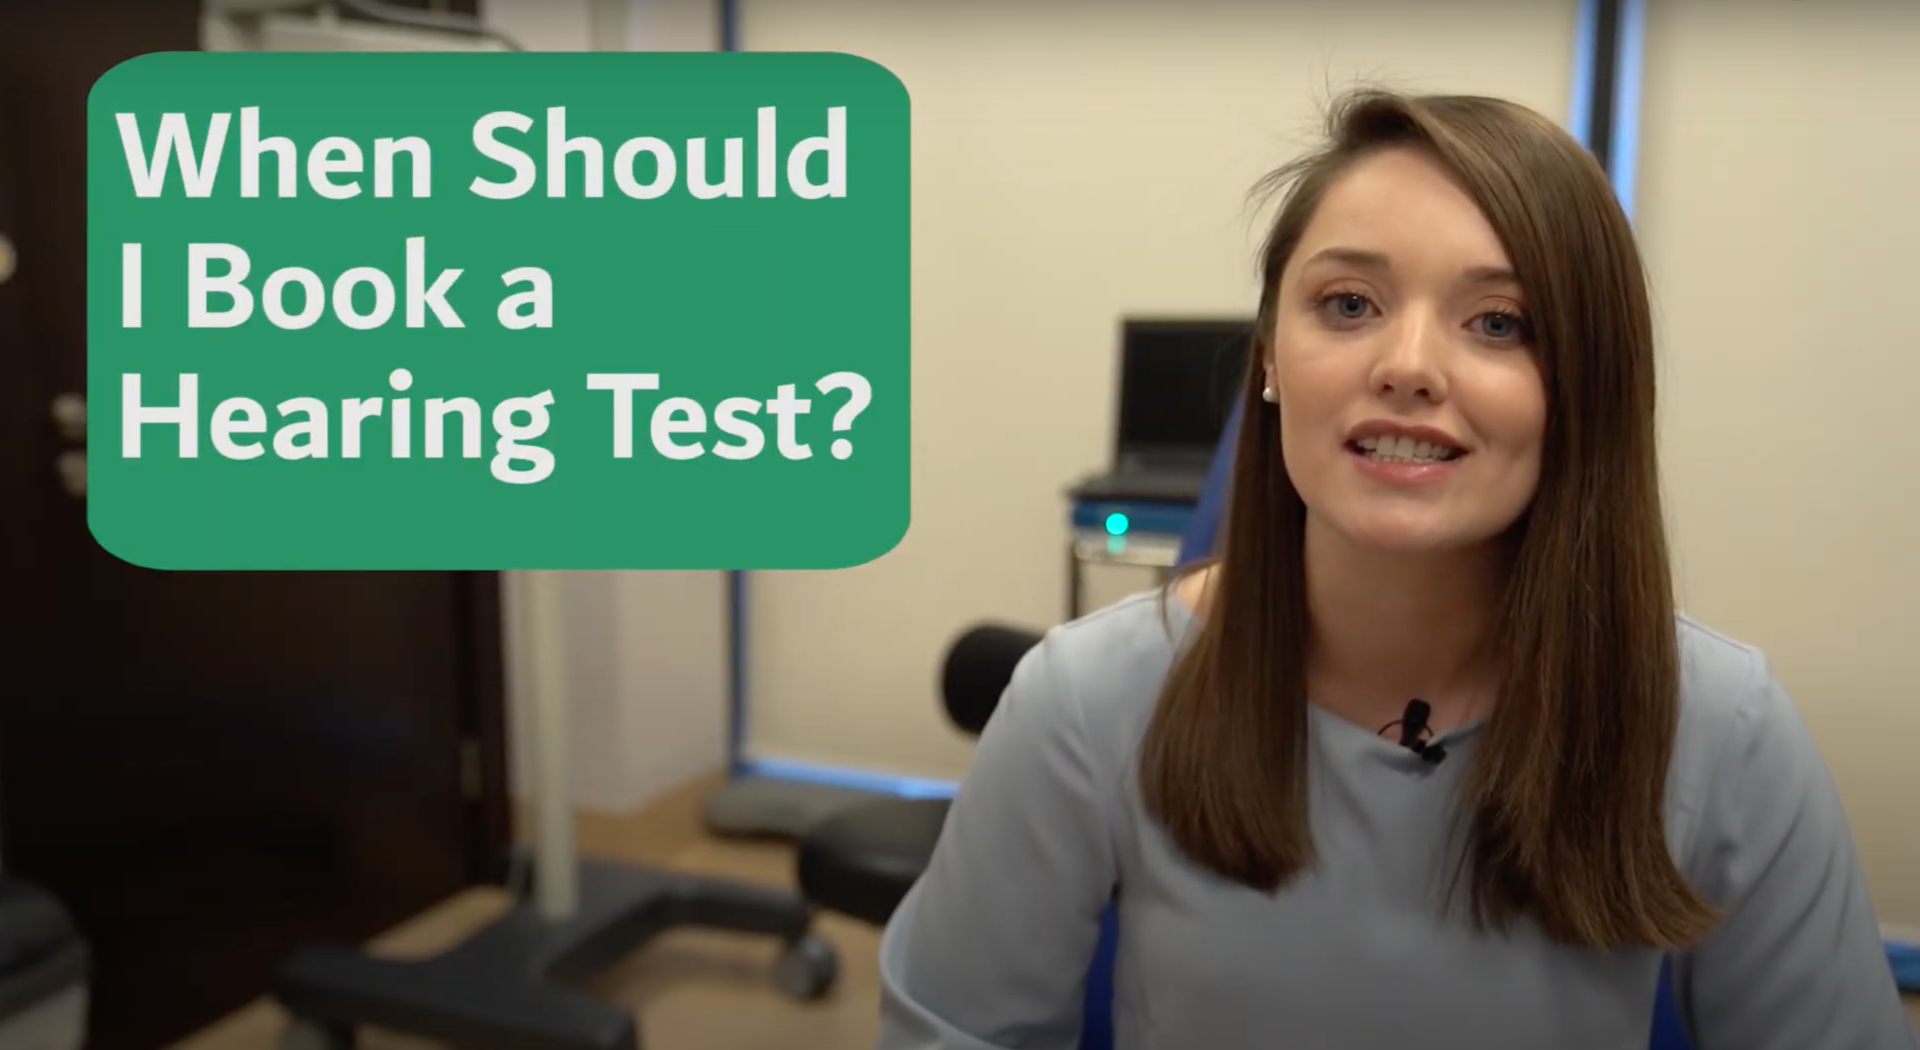 When Should I Book a Hearing Test? Image